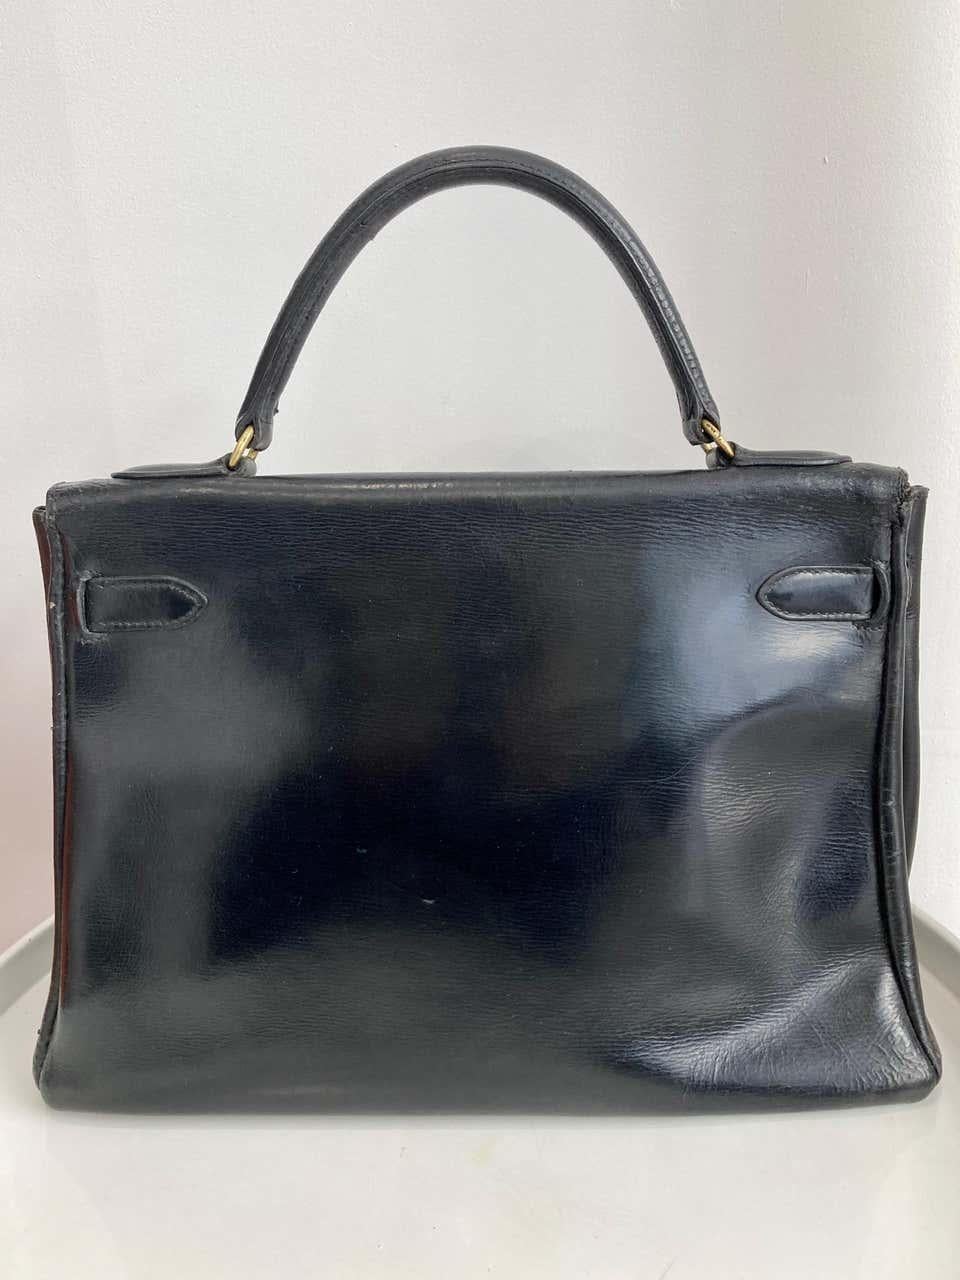 1960's Hermès black box calf leather Kelly 32 tote bag featuring a foldover top with push-lock closure, a top handle, plated gold-tone hardware and an internal pockets. 
Marked Hermes Paris
In fair vintage condition ( see the top part aged). Made in